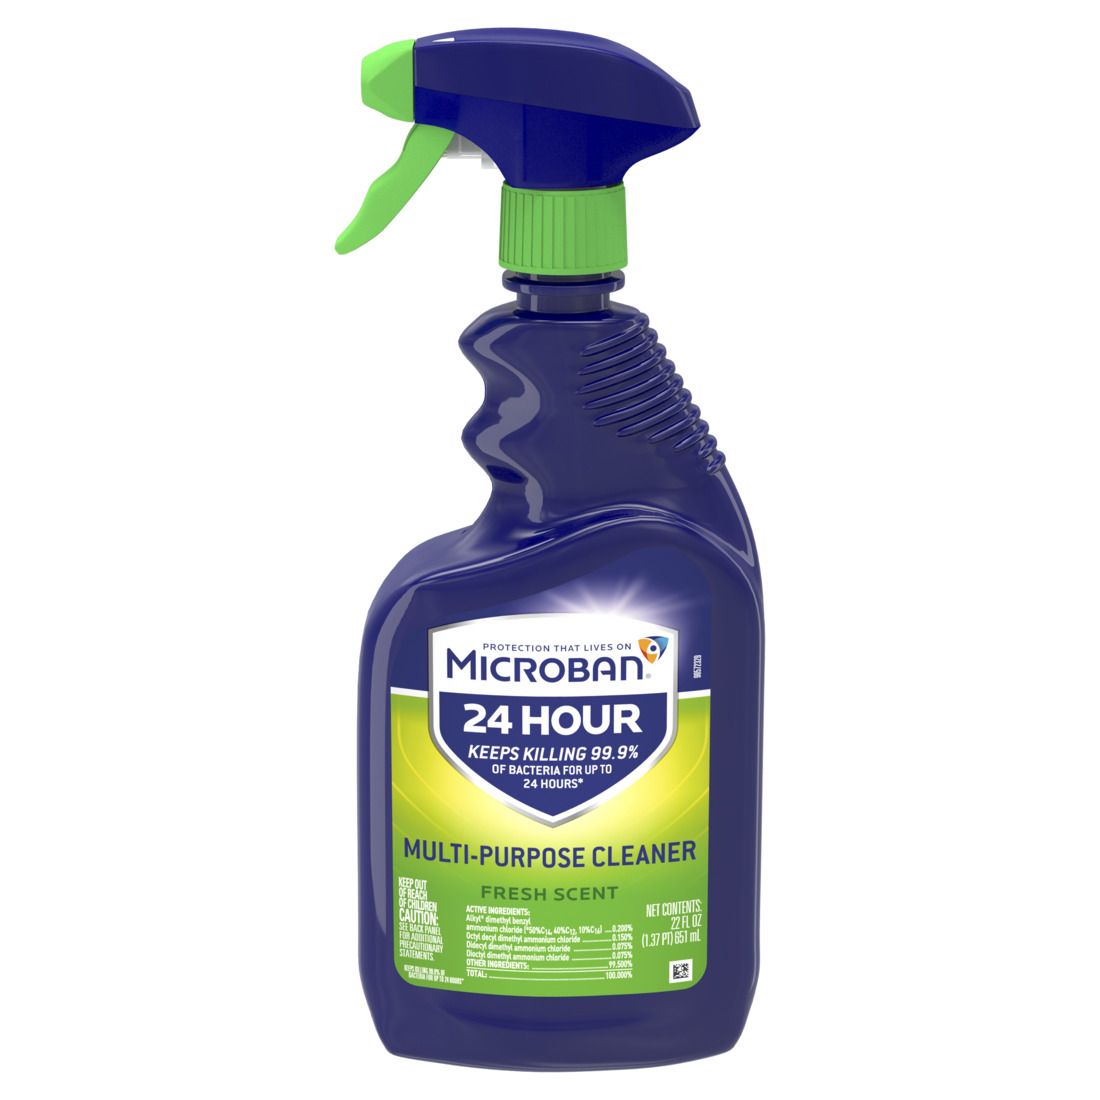 Microban 24 hr Multi-Purpose Cleaner and Disinfectant Fresh Scent Spray - 22oz/4pk